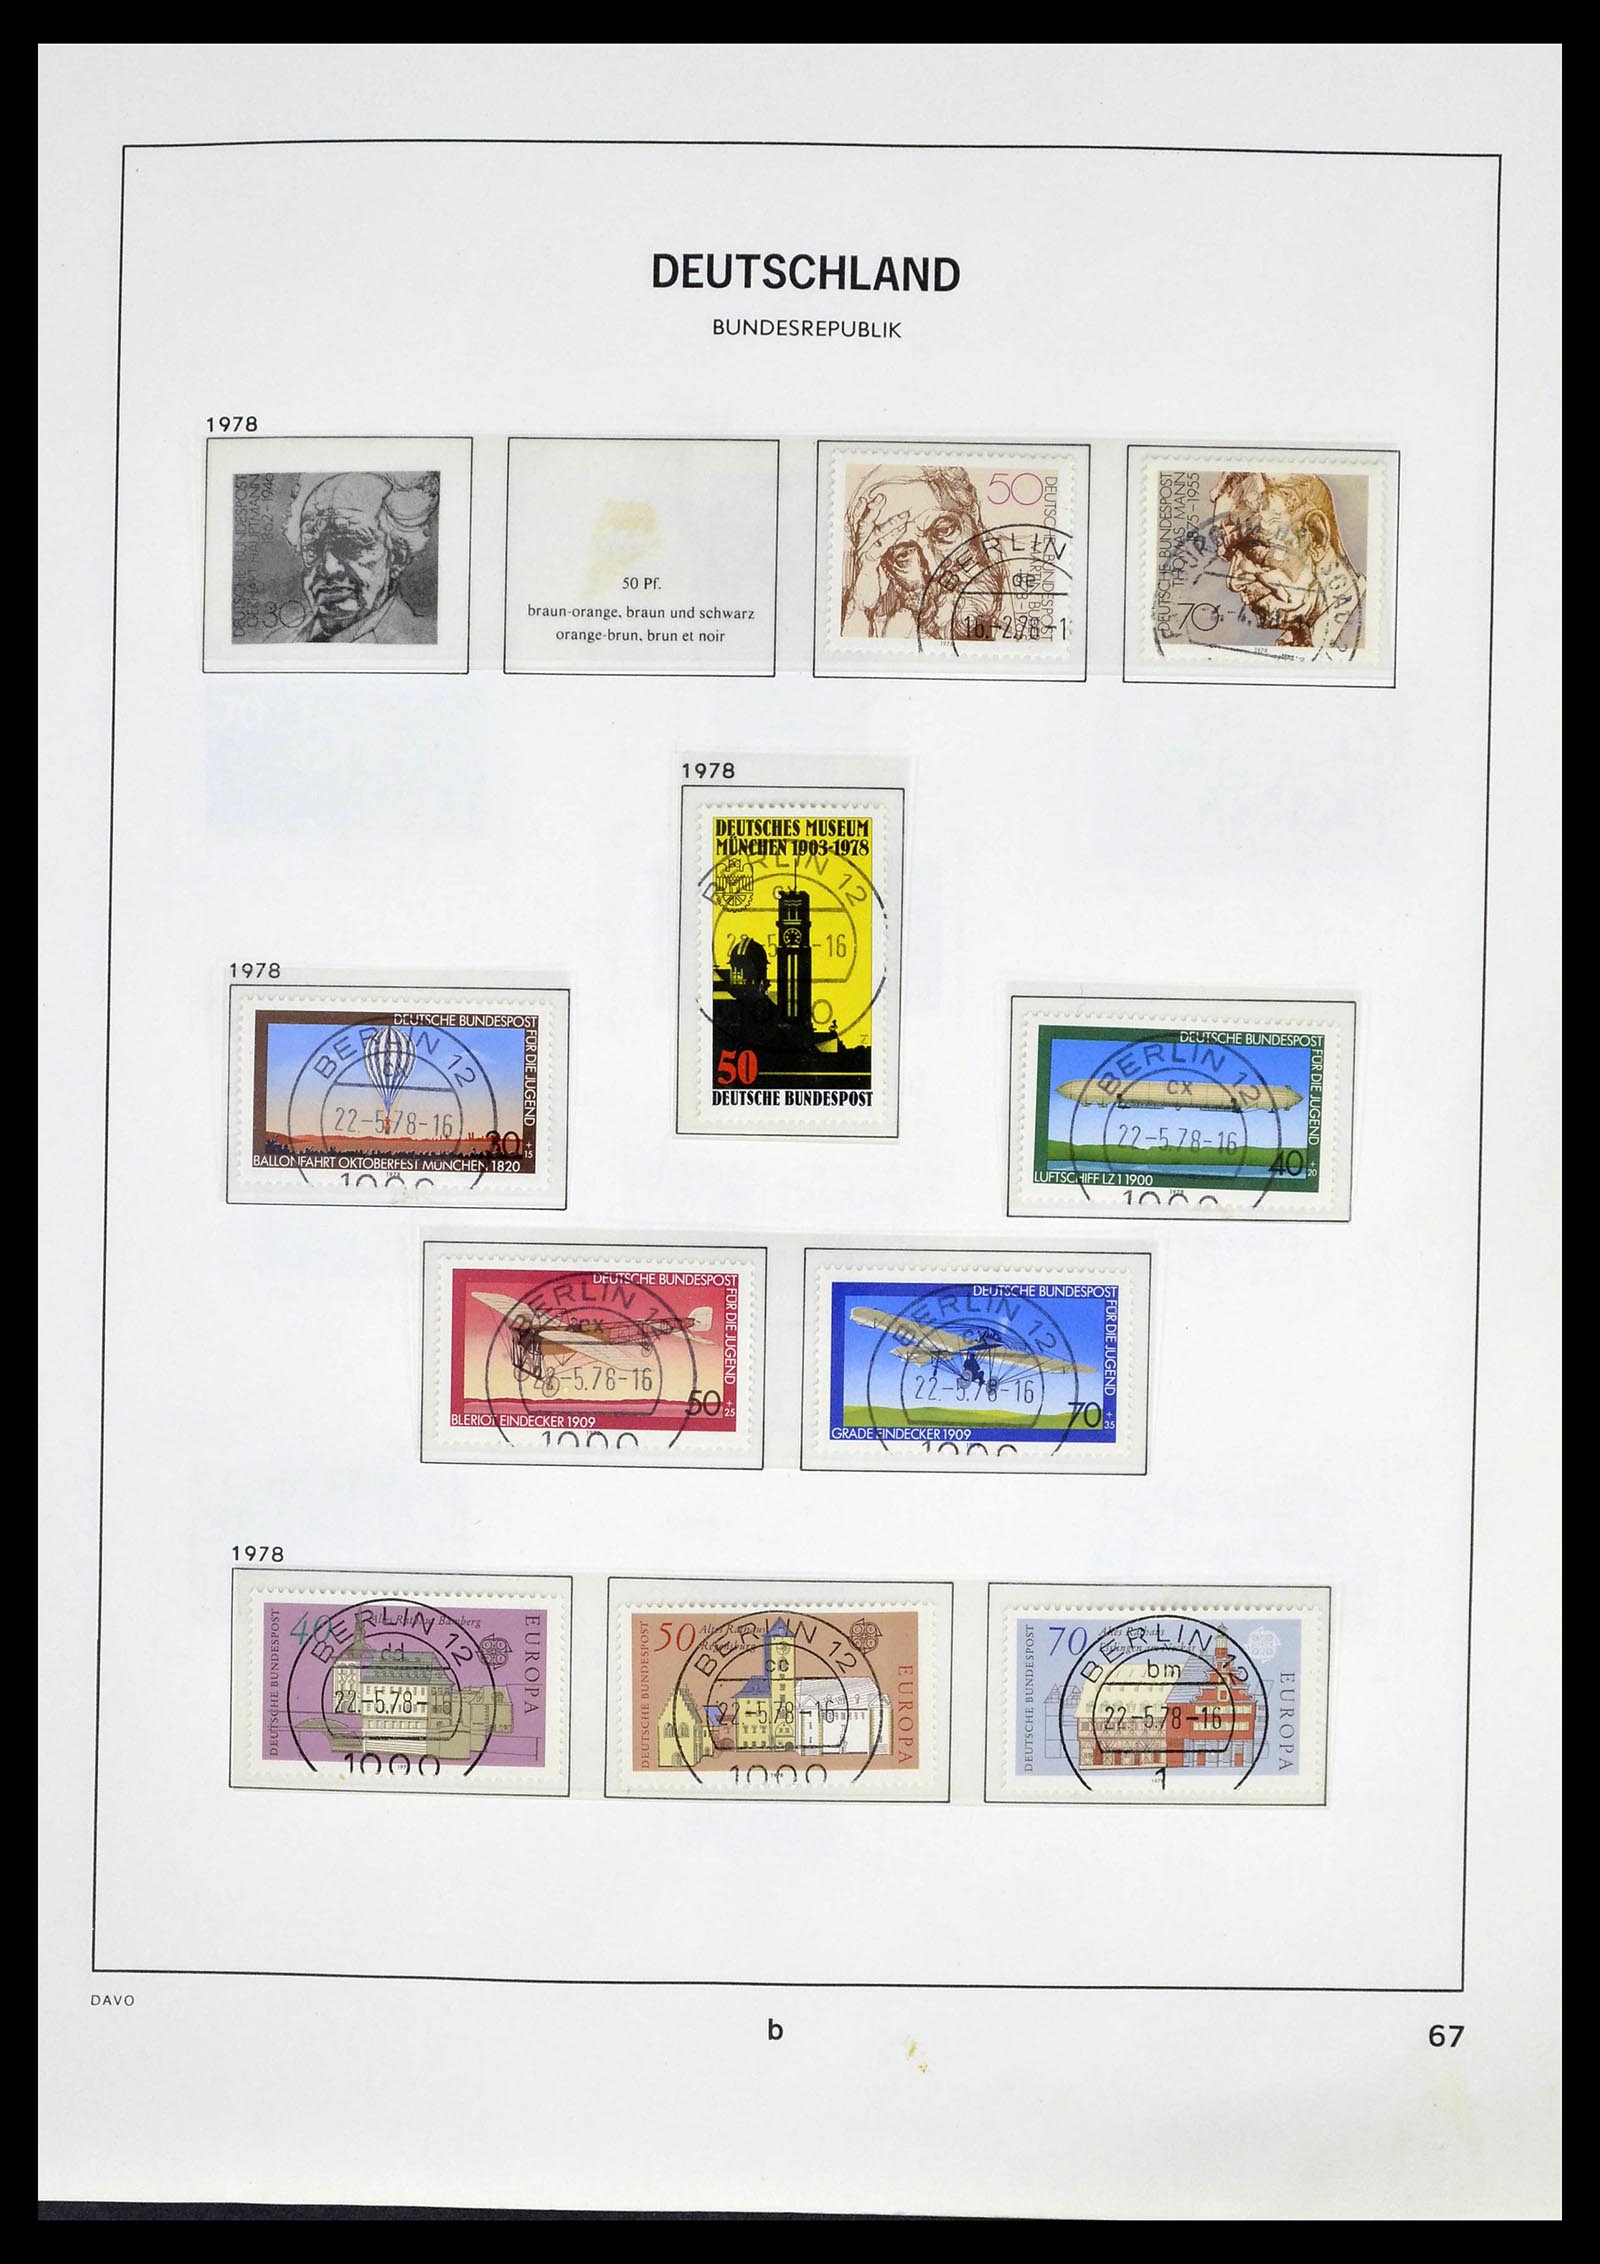 39326 0070 - Stamp collection 39326 Bundespost 1949-2003.